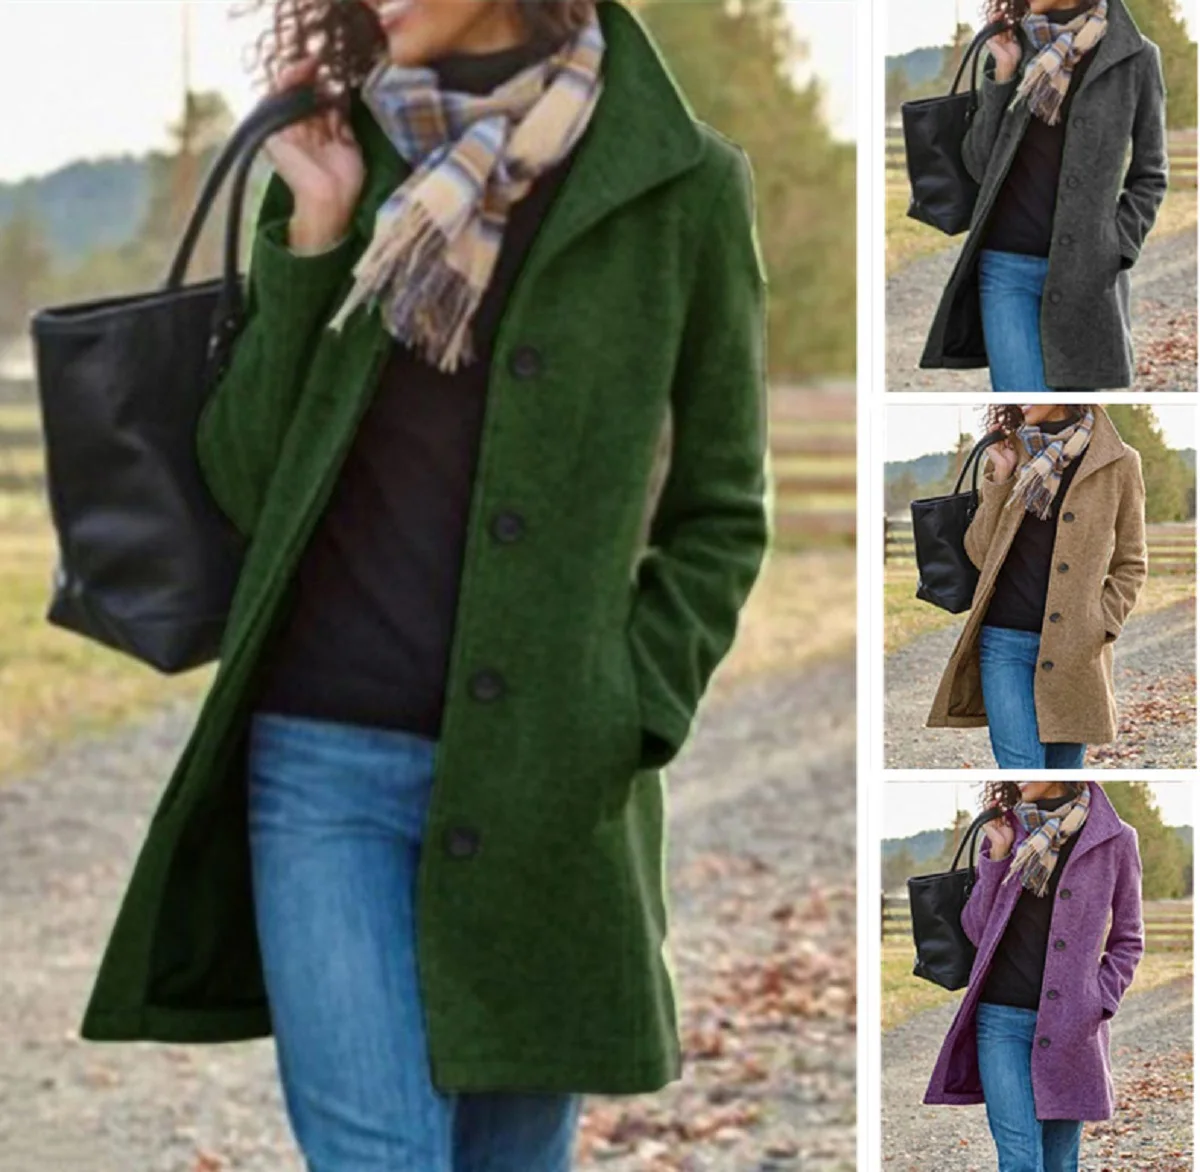 Autumn Winter Loose Maternity Thick Long Trench Coat Jacket Top Causal Women Single-Breasted Woolen Outwear Coat Capes Plus Size foluxyandy women trench coat plus size coats elastic waist single button loose long trench outerwear kkfy5888